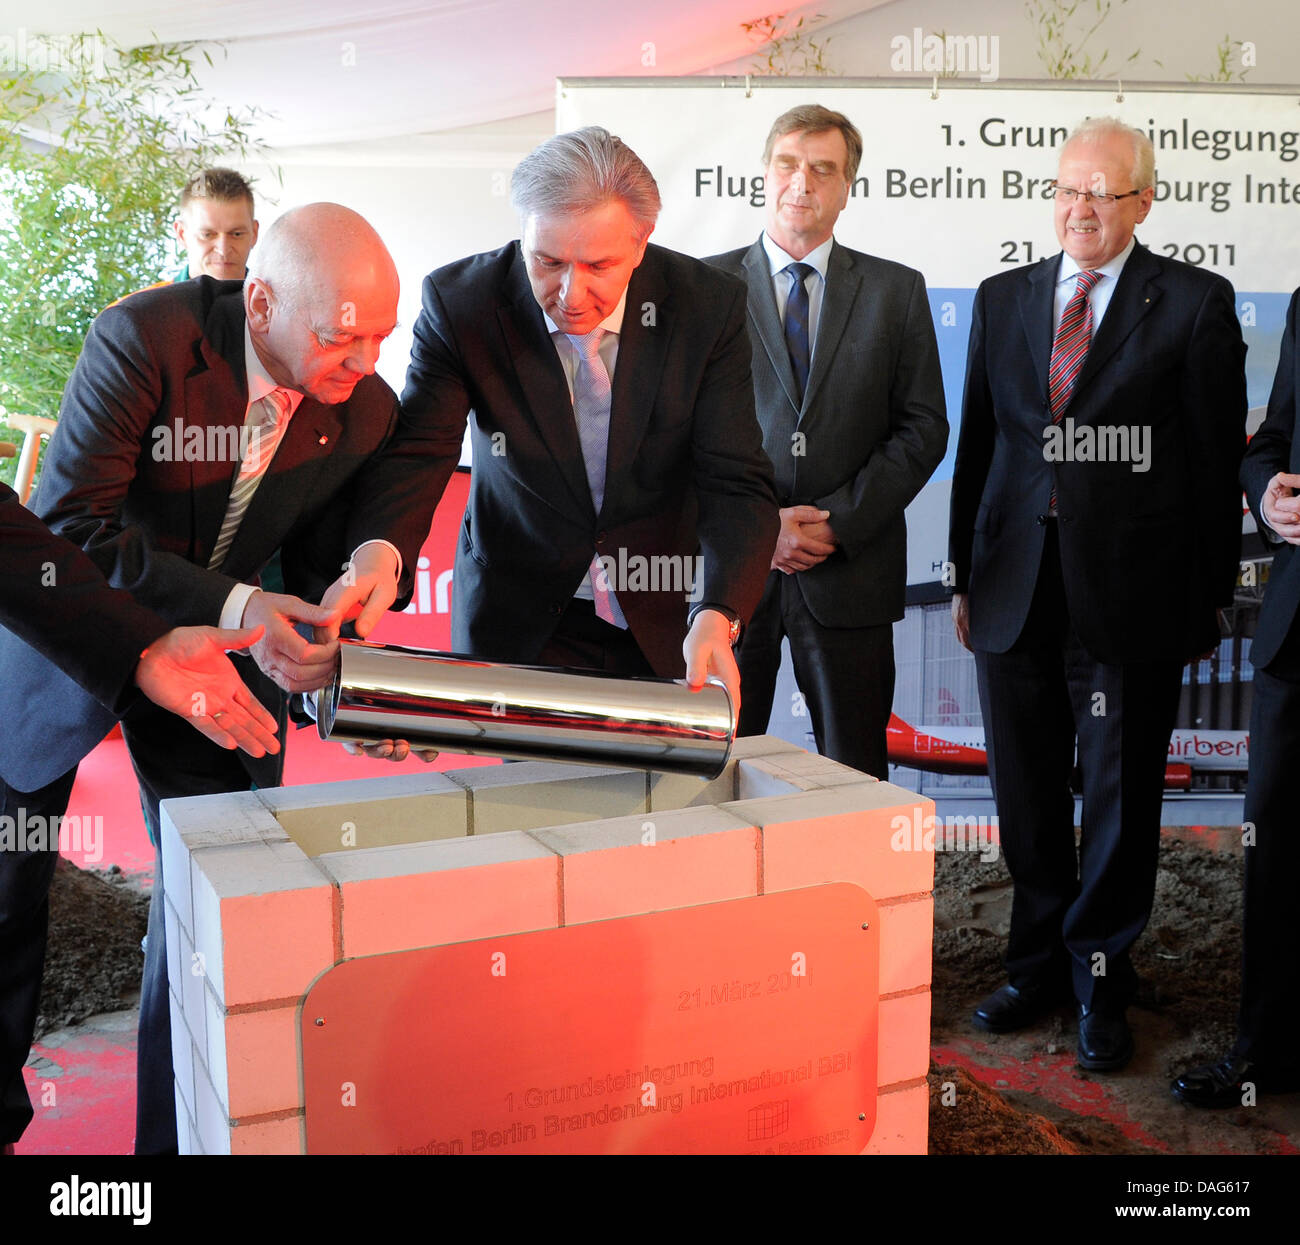 Air Berlin CEO Joachim Hunold (L) and Berlin Mayor Klaus Wowereit (2-L) lay down the foundational stone for a new Air Berlin hangar at Berlin-Brandenburg International Airport (BBI), which is still under construction in Schoenefeld, Germany, 21 March 2011. Brandenburg's Economy Minister Ralf Christoffers (2-R) and BBI managing director Manfred A. Koertgen (R) watch the ceremonial a Stock Photo